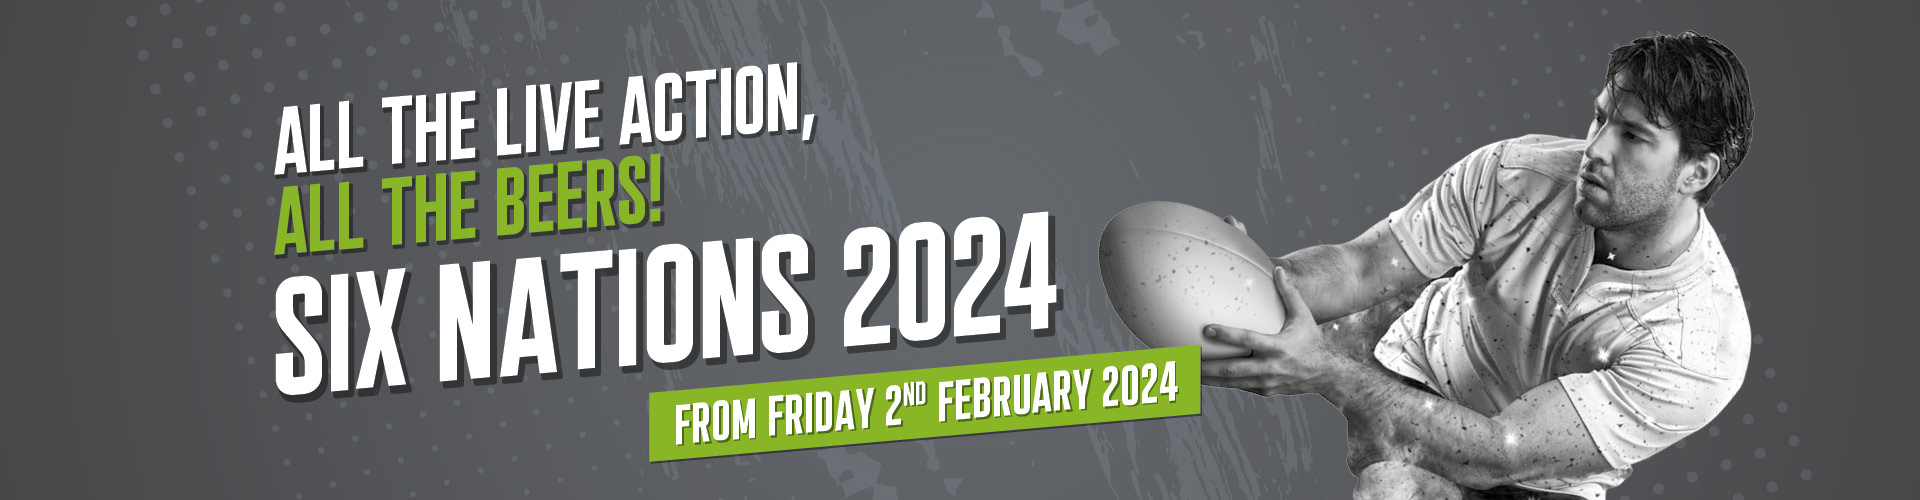 Six Nations 2024 at The Richmond Hotel